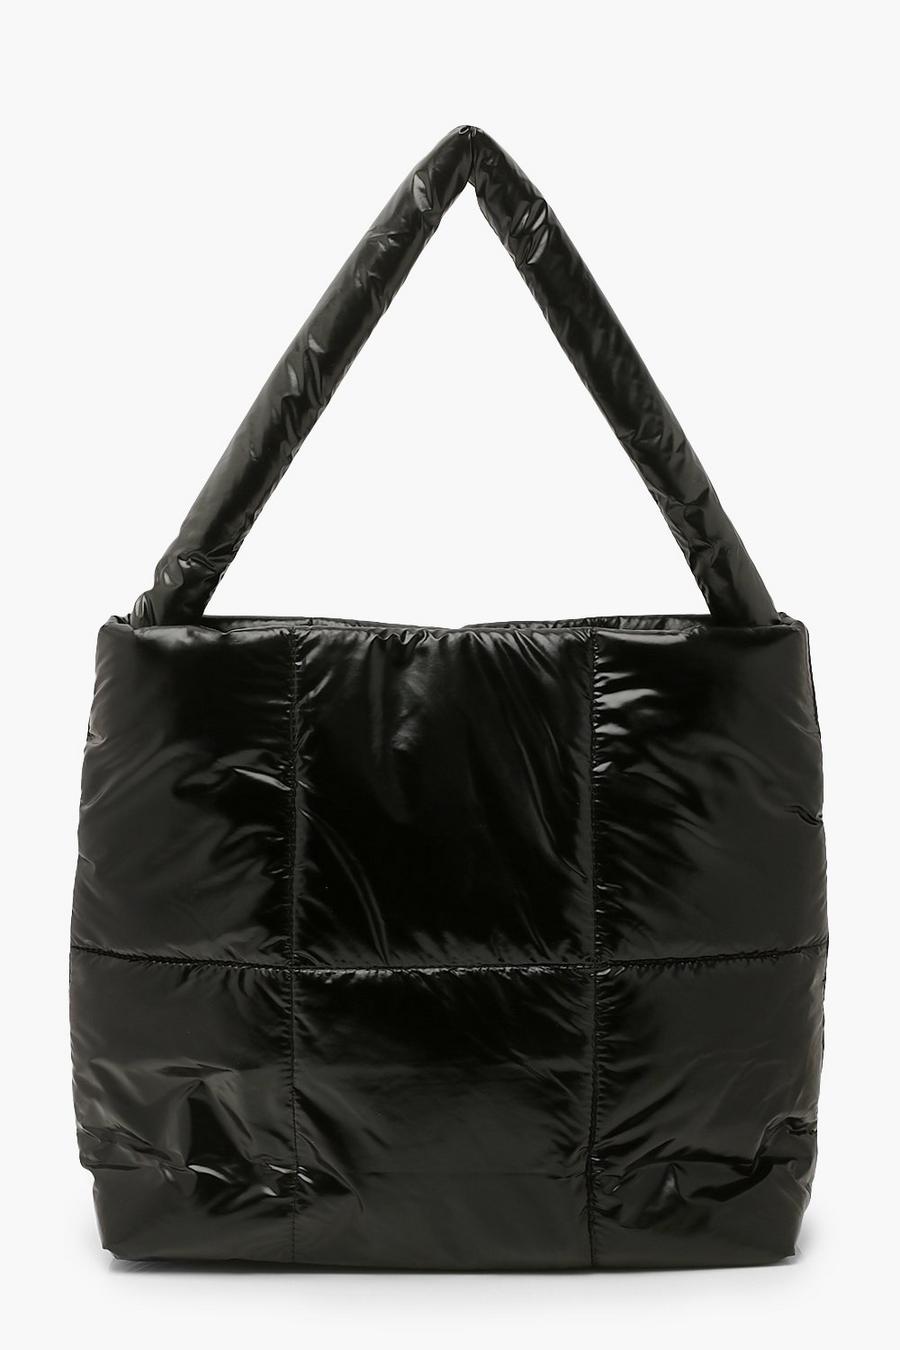 boohoo Nylon Quilted Tote Bag - Black - One Size